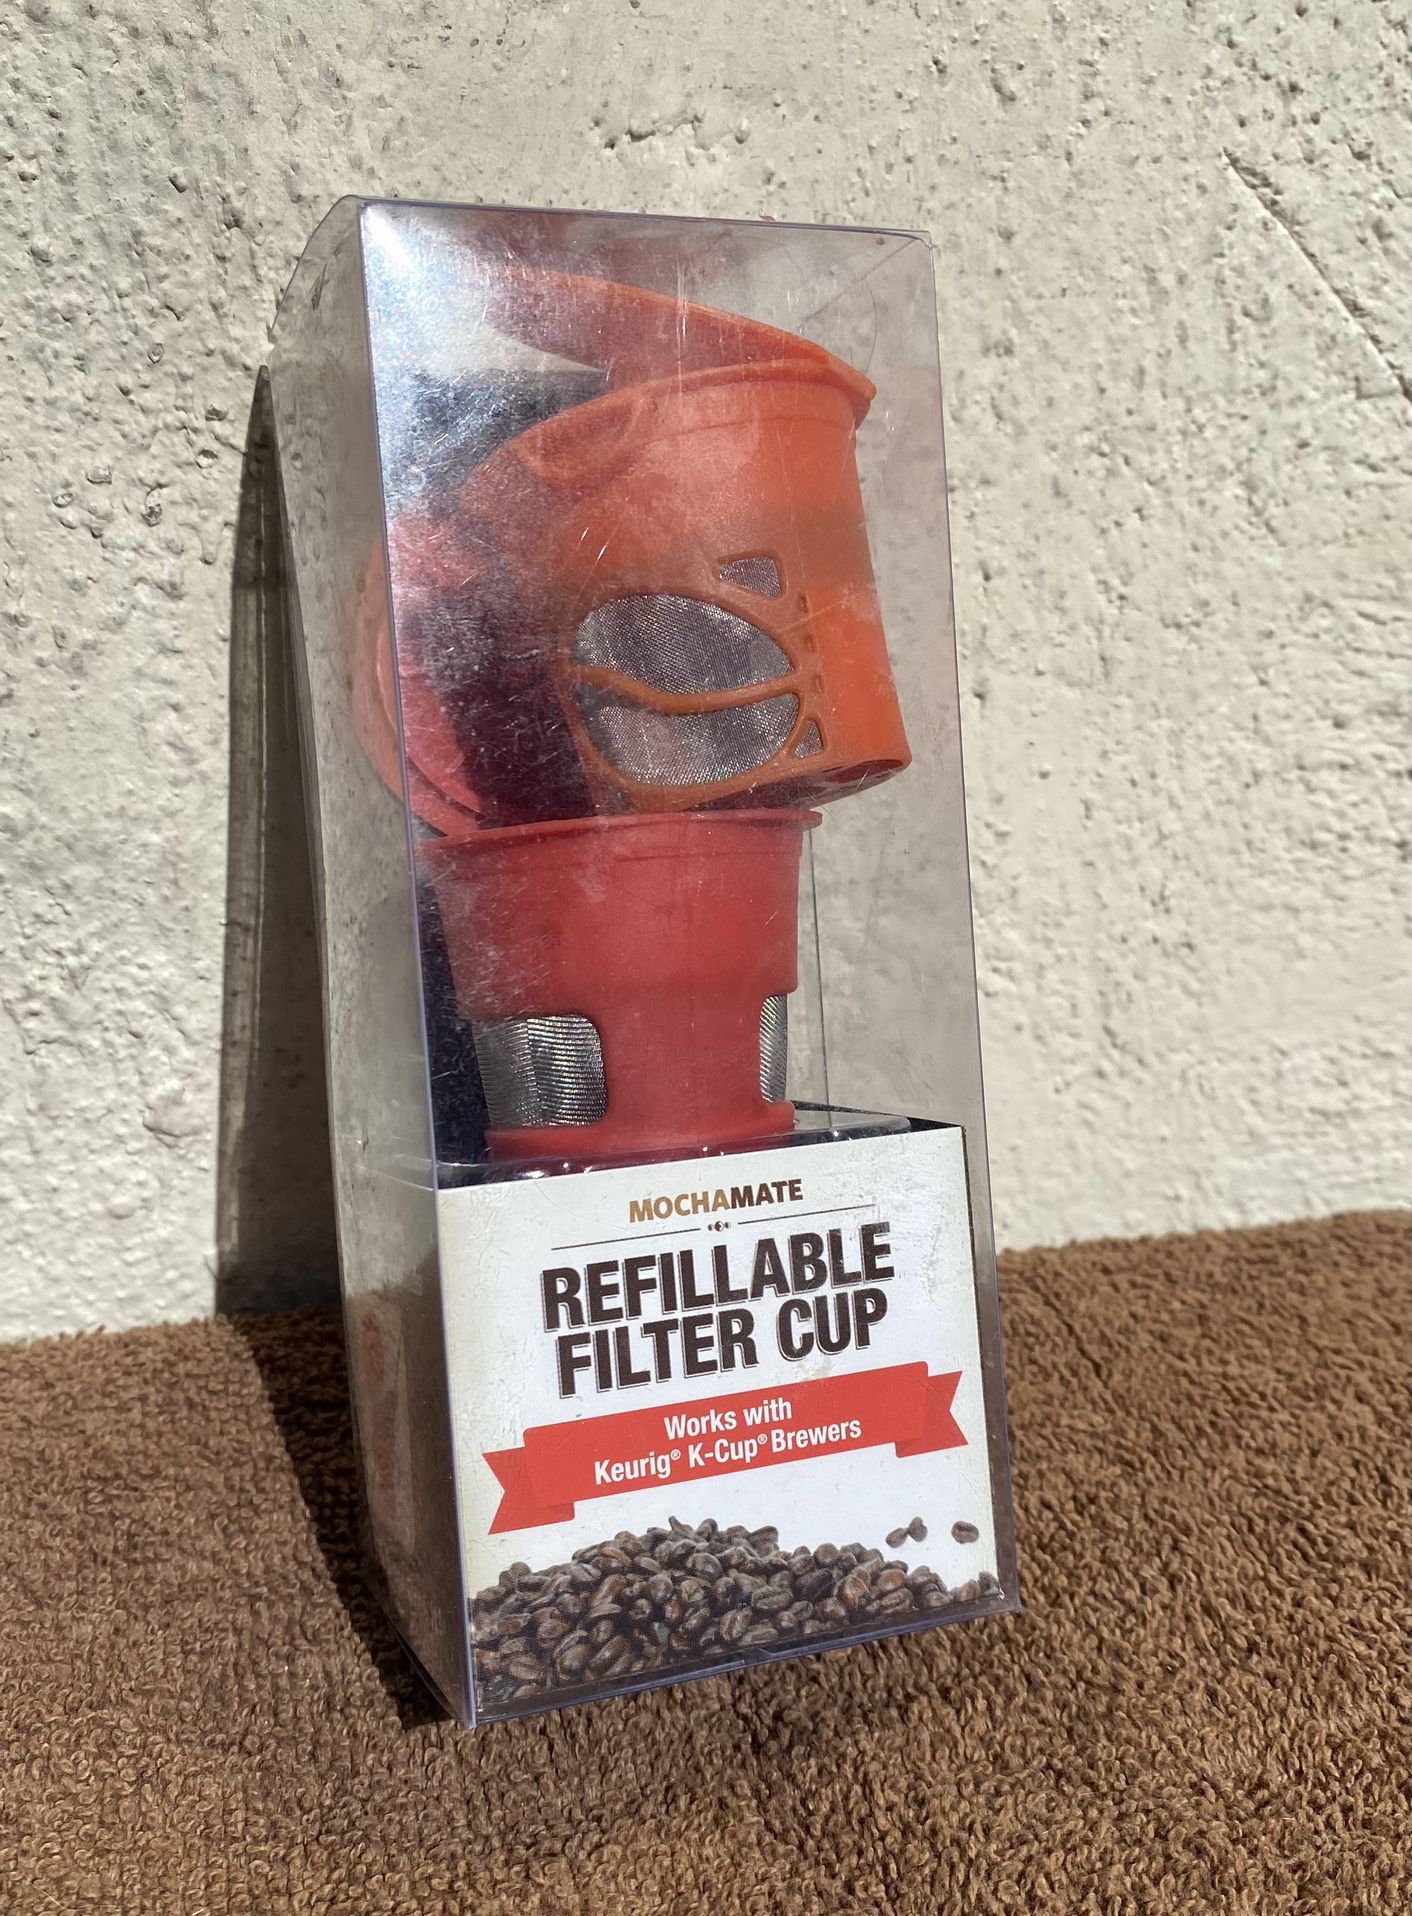 Refillable Filter Cup Mochamate 